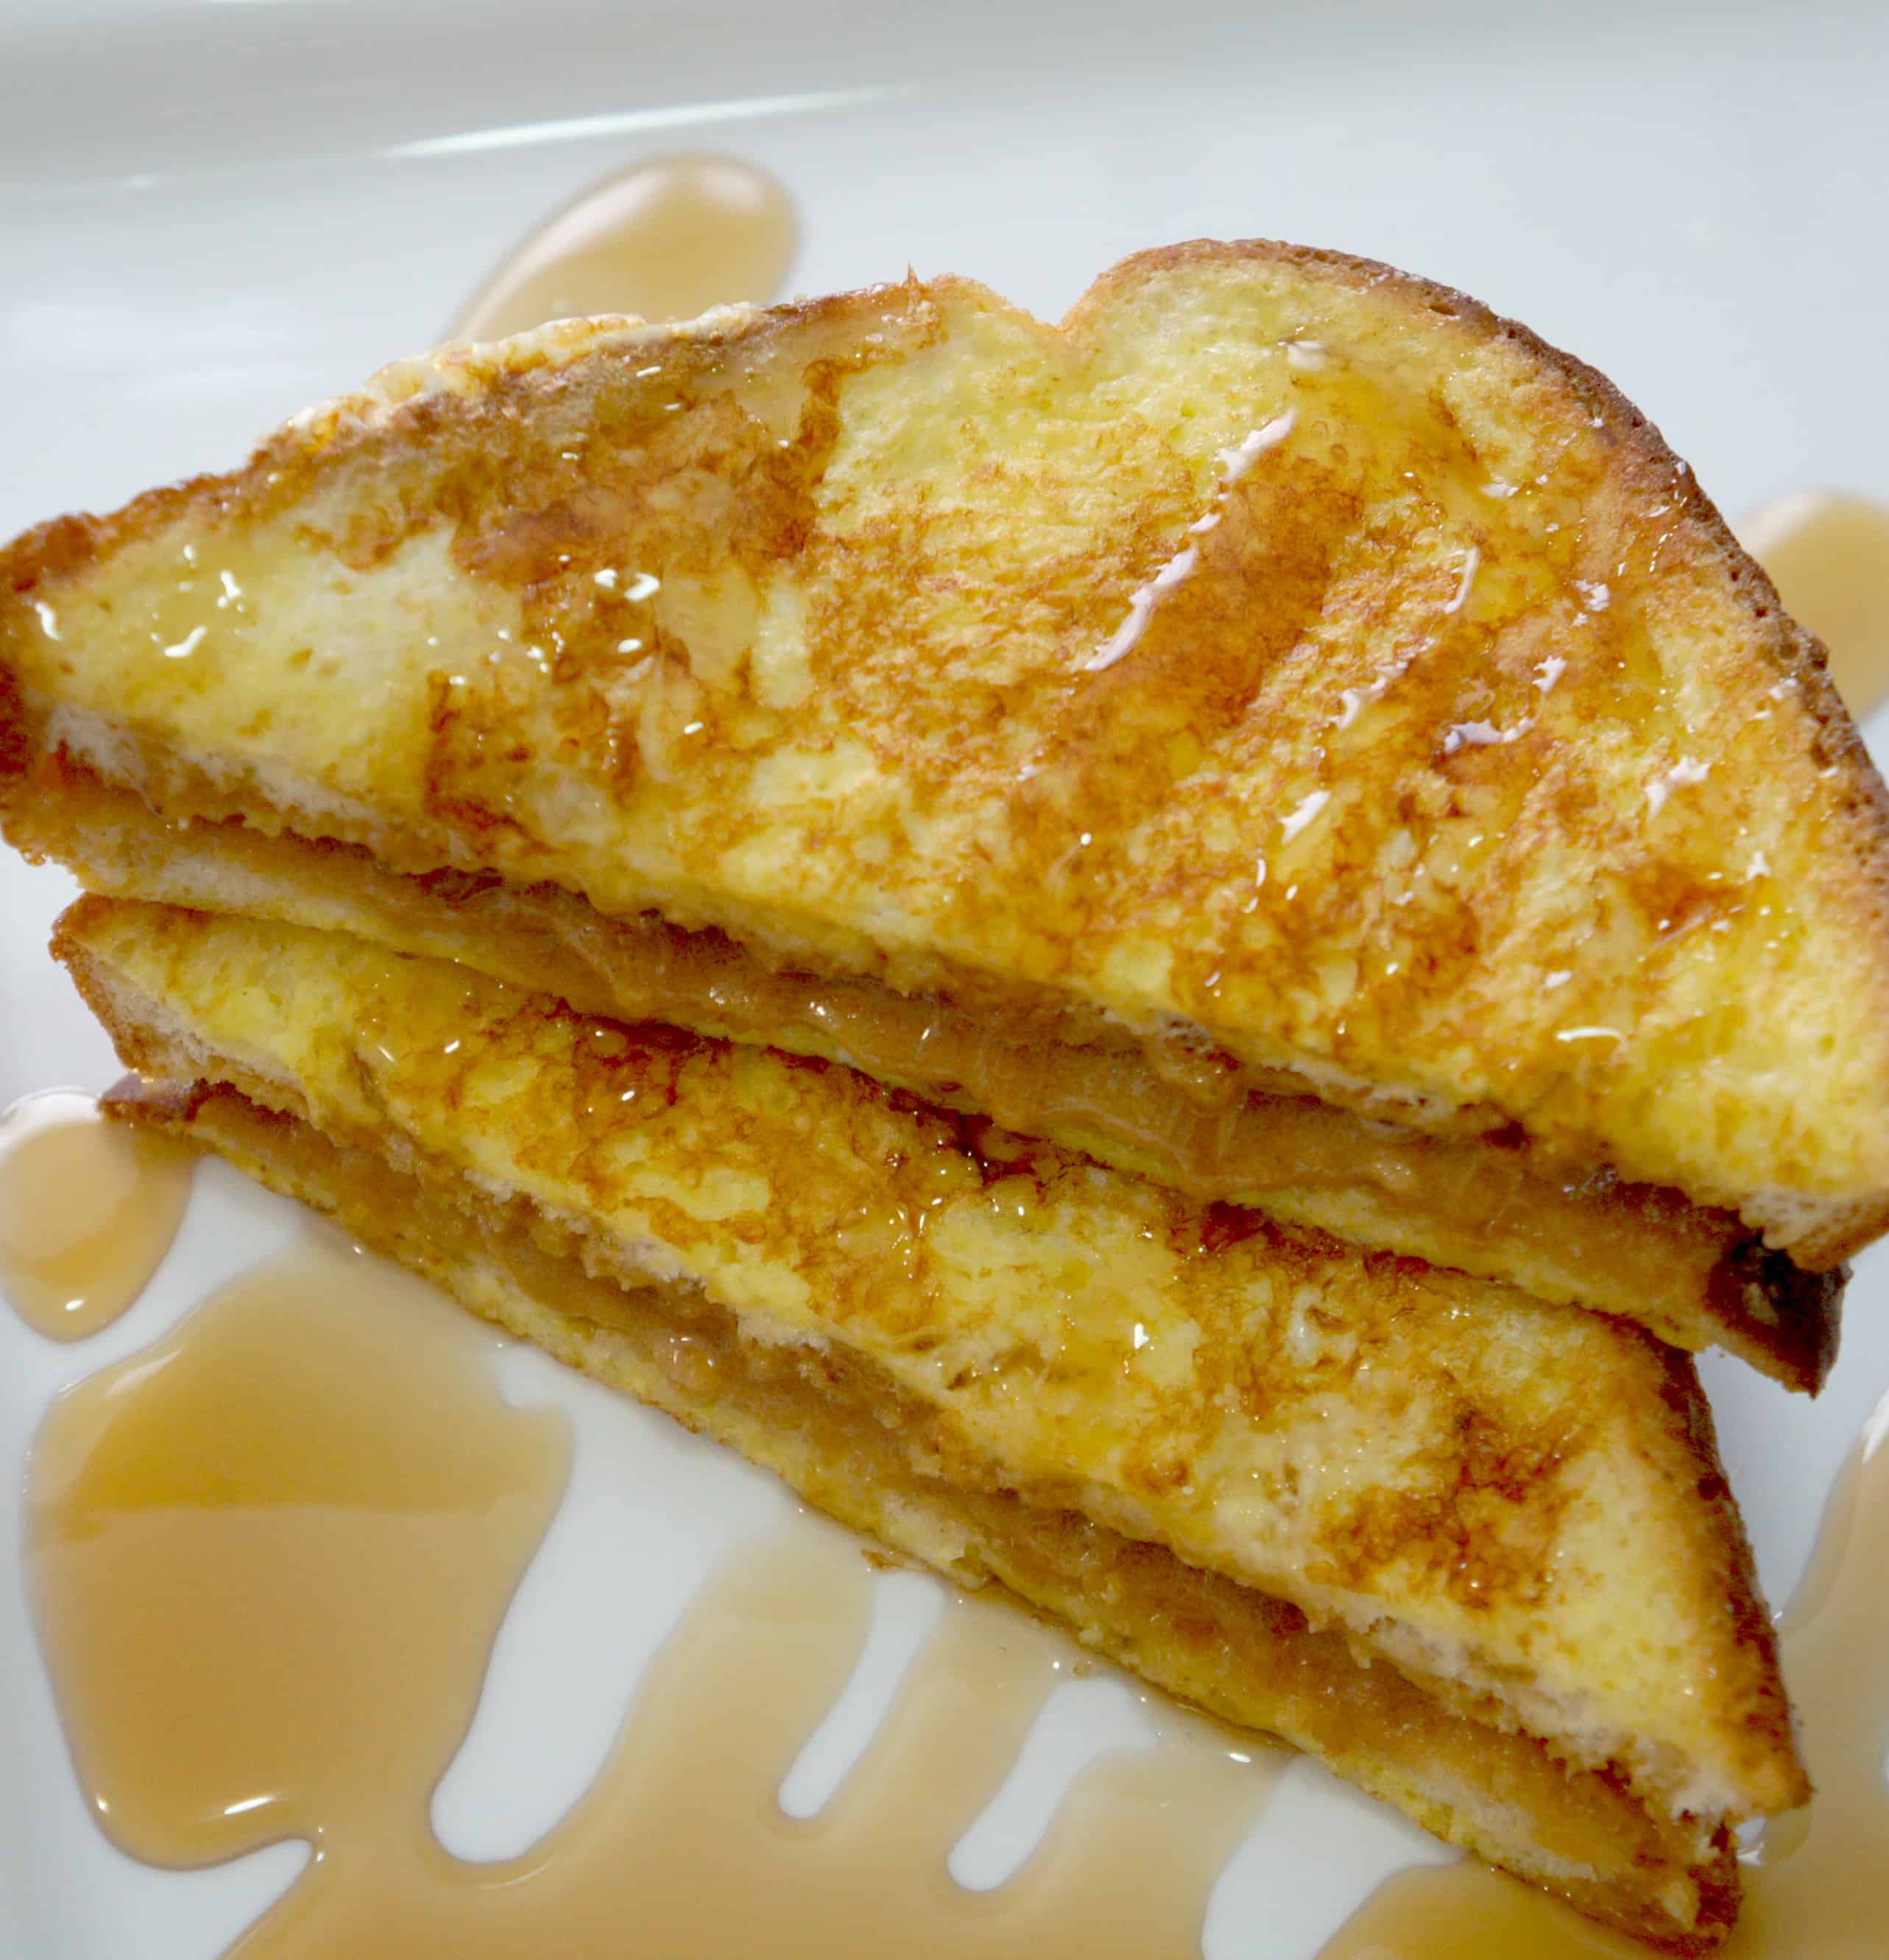 Peanut Butter & Brown Sugar French Toast. Easy breakfast recipe.